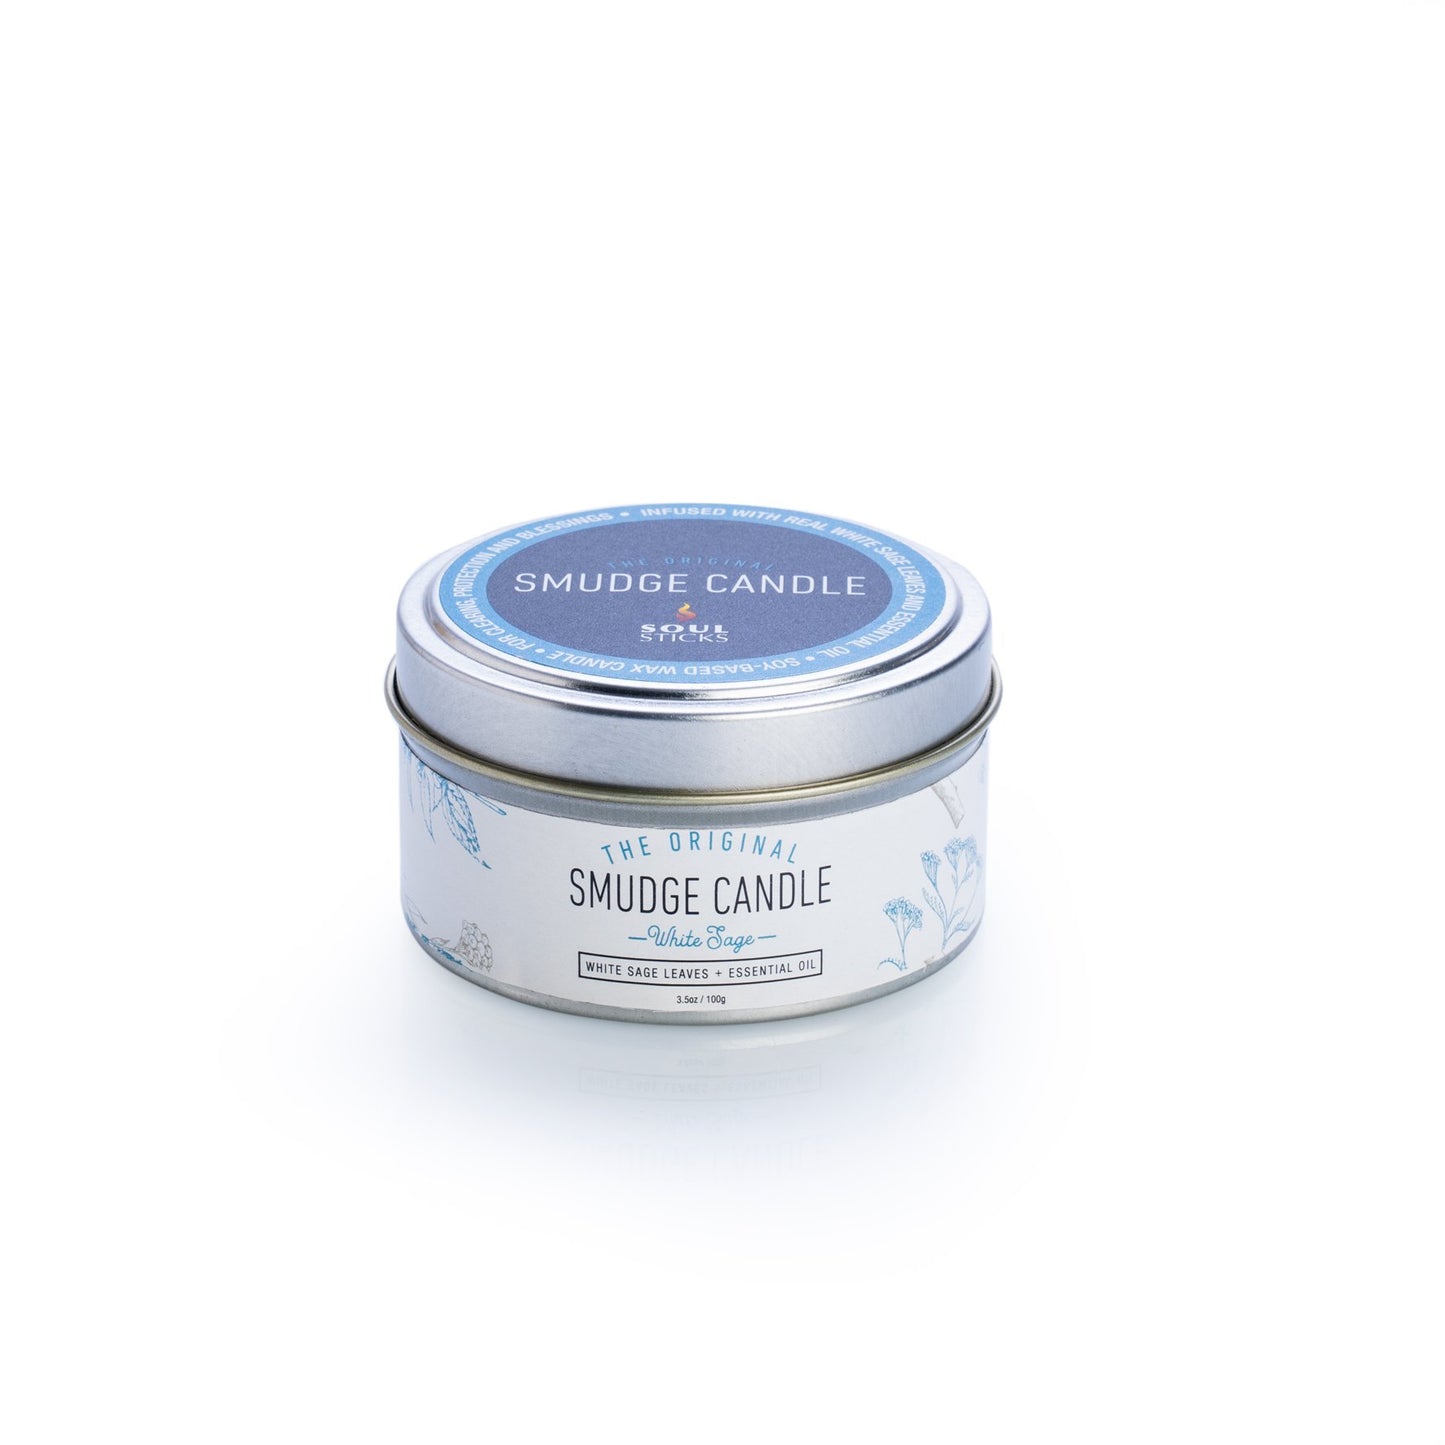 Smudge candle - white sage - Rivendell Shop